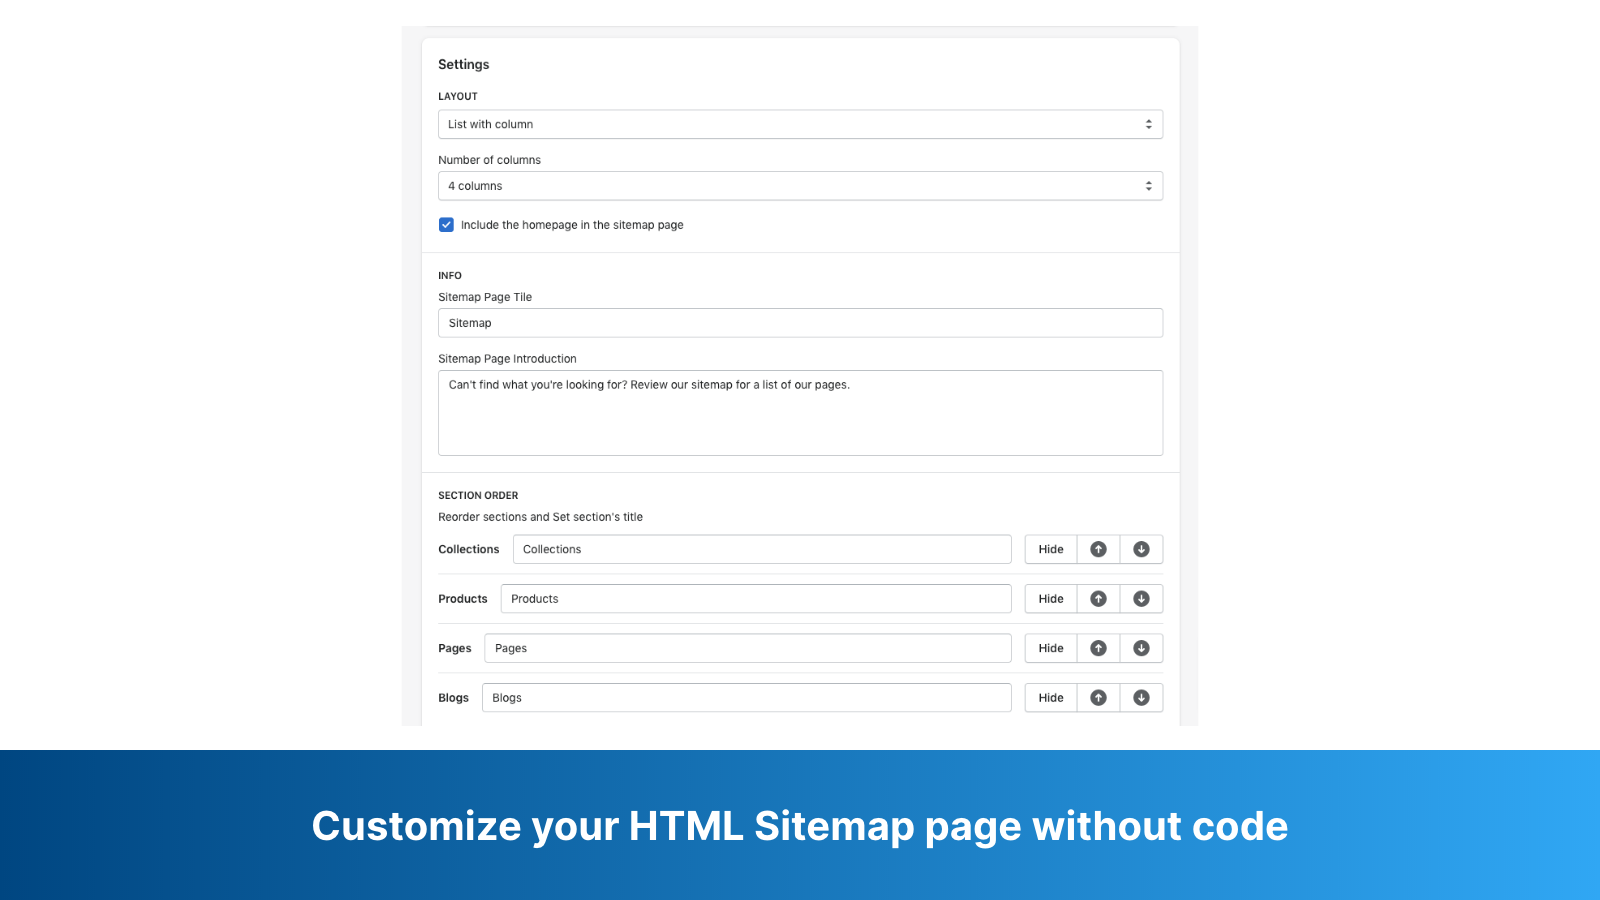 Customize your HTML Sitemap page without code